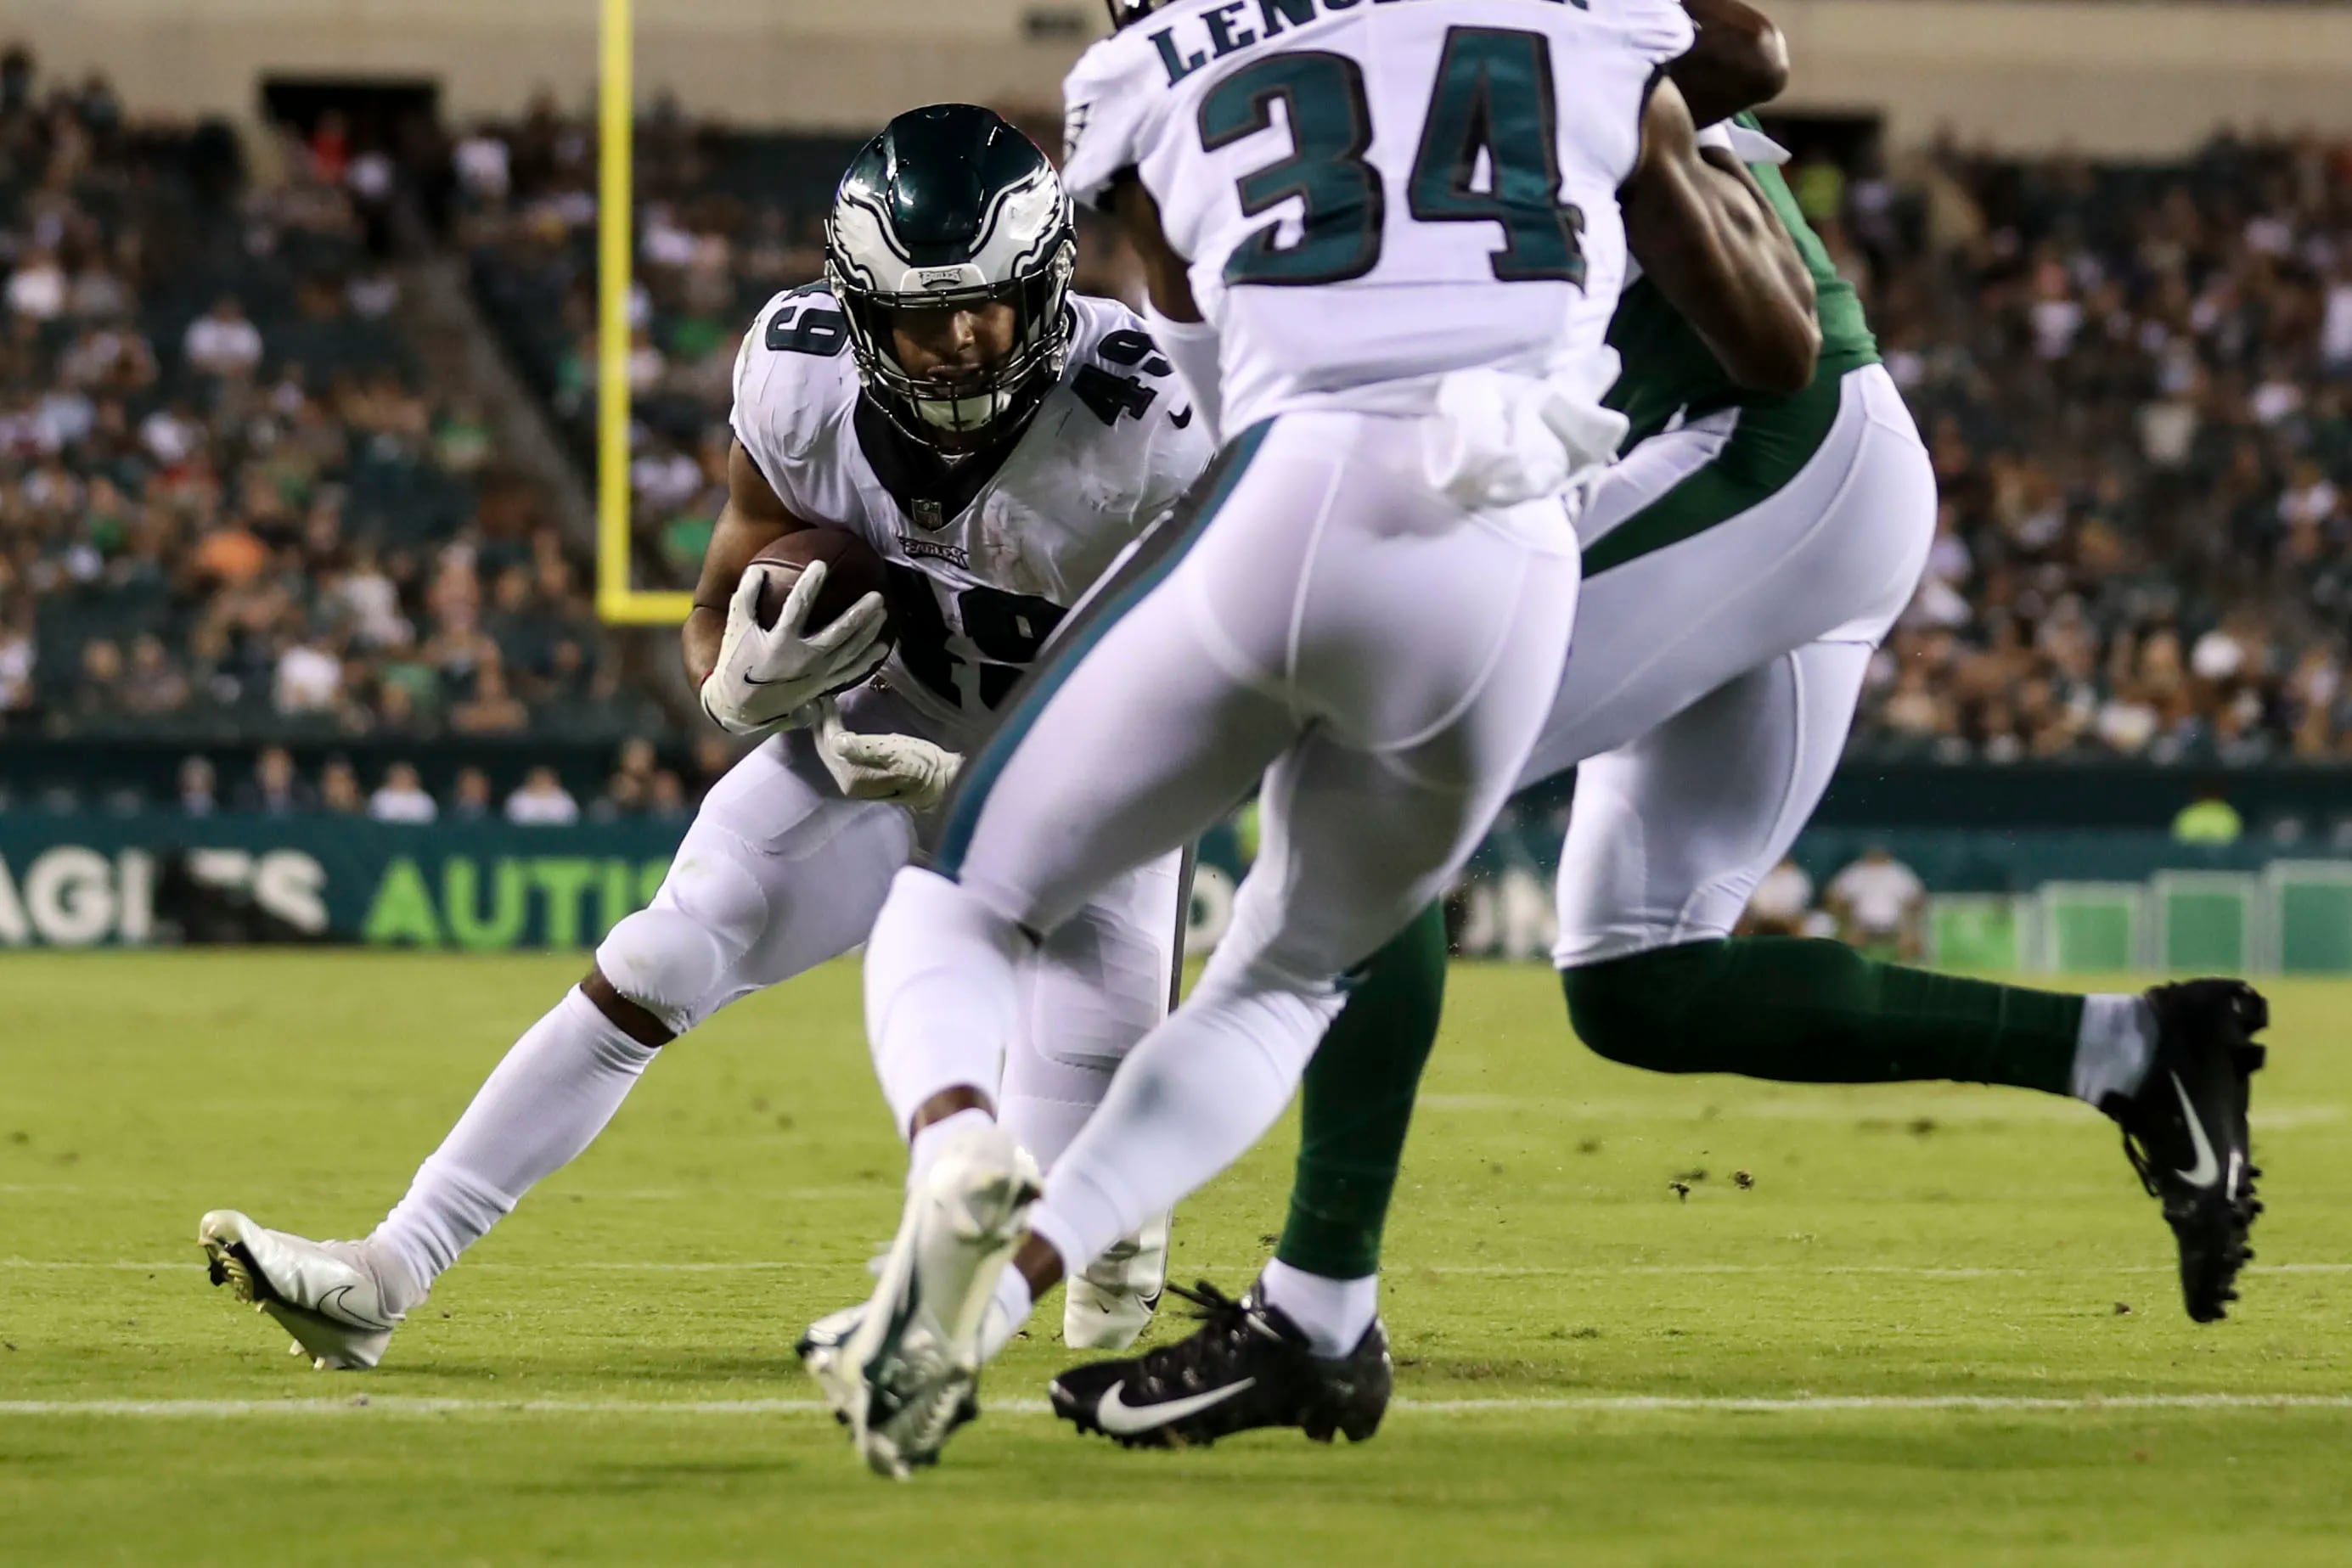 Photos of the Eagles' 24-21 preseason loss to the Jets